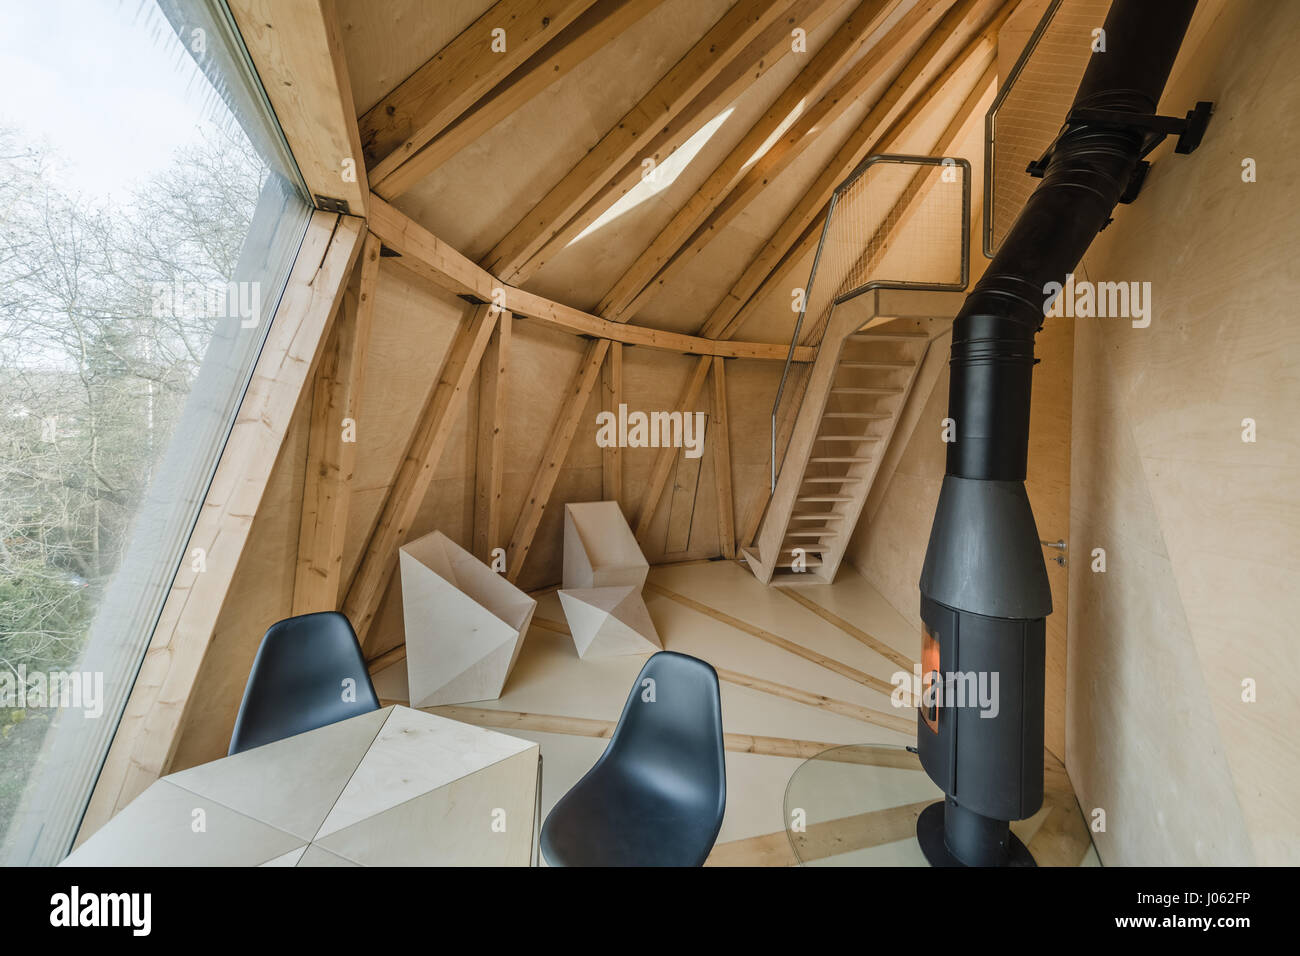 CZECH REPUBLIC: The living room. LIKE A house from a children’s fairy tale this quirky home set in a stunning orchard looks just like a giant pear. The series of quirky images show inside the home’s curved interior of the living room complete with cosy wood burner and narrow kitchen and bathroom. One shot even shows a floor length window open towards the outdoors. Exterior shots show the pear-shaped home’s concrete foot that supports its structure and another photo shows a steel footbridge that connects to the ground below. The home also known as the House in the Orchard is built on a slope an Stock Photo